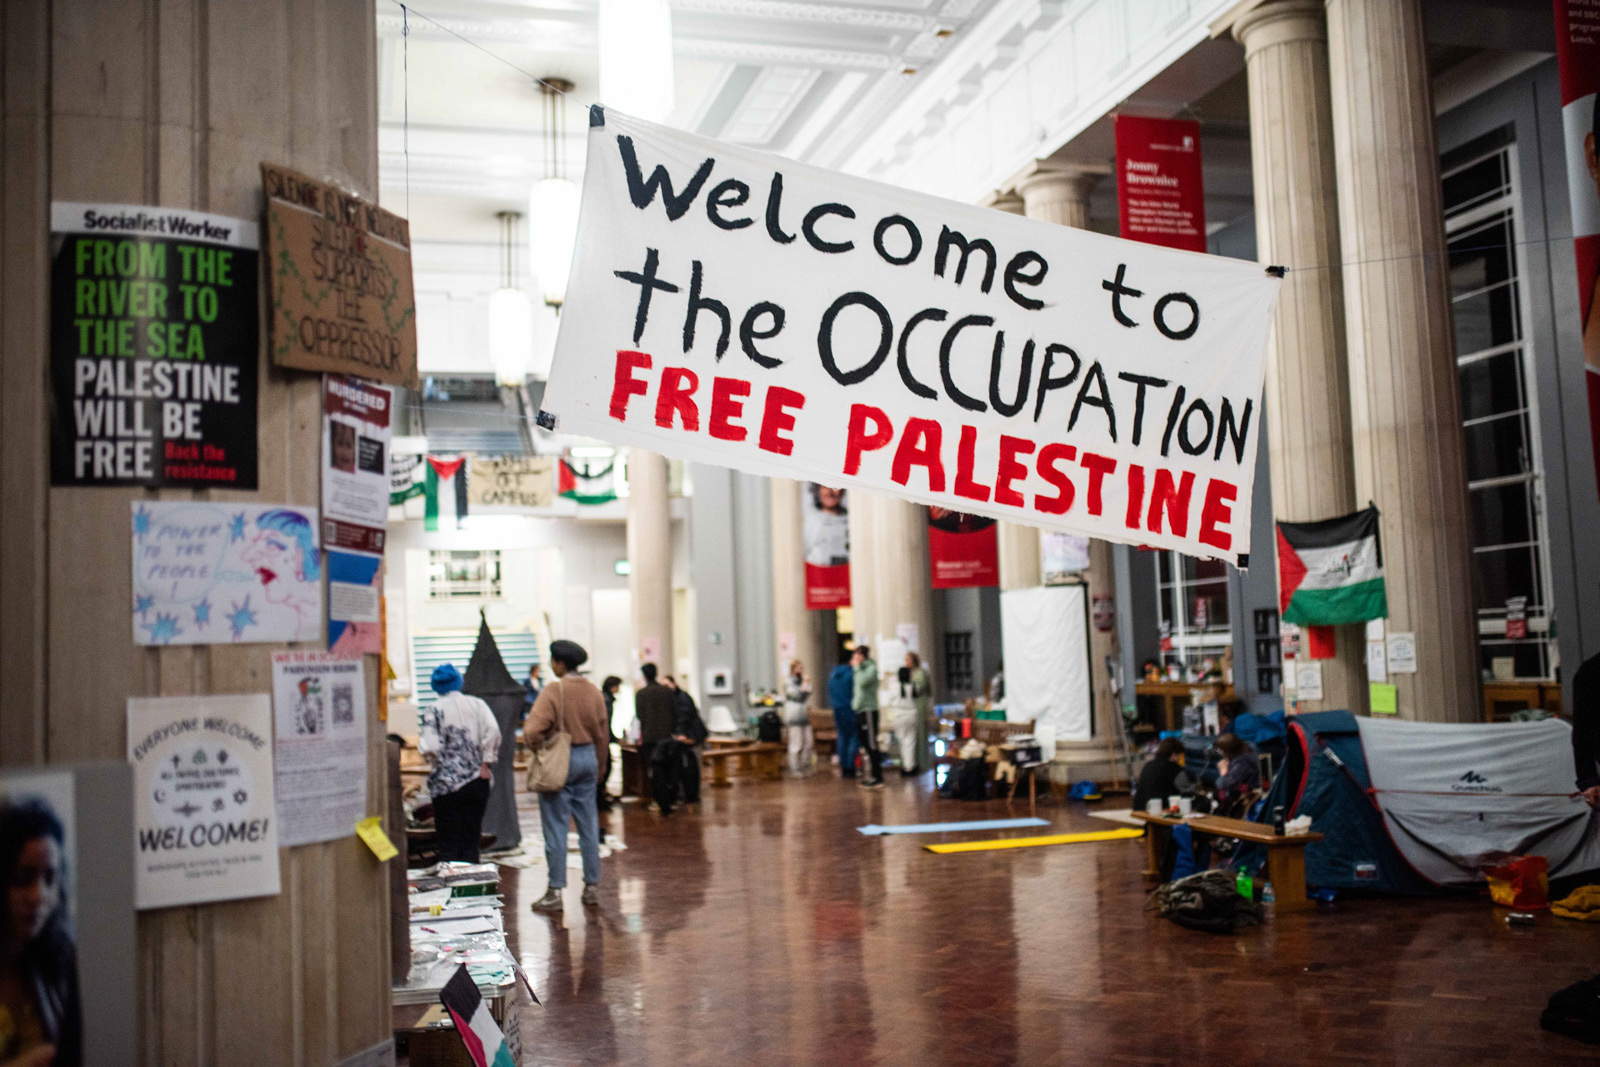 Leeds University students protesting the assault on Gaza occupied a campus building for 15 days in March. Photograph courtesy of Spencer R. Lewis